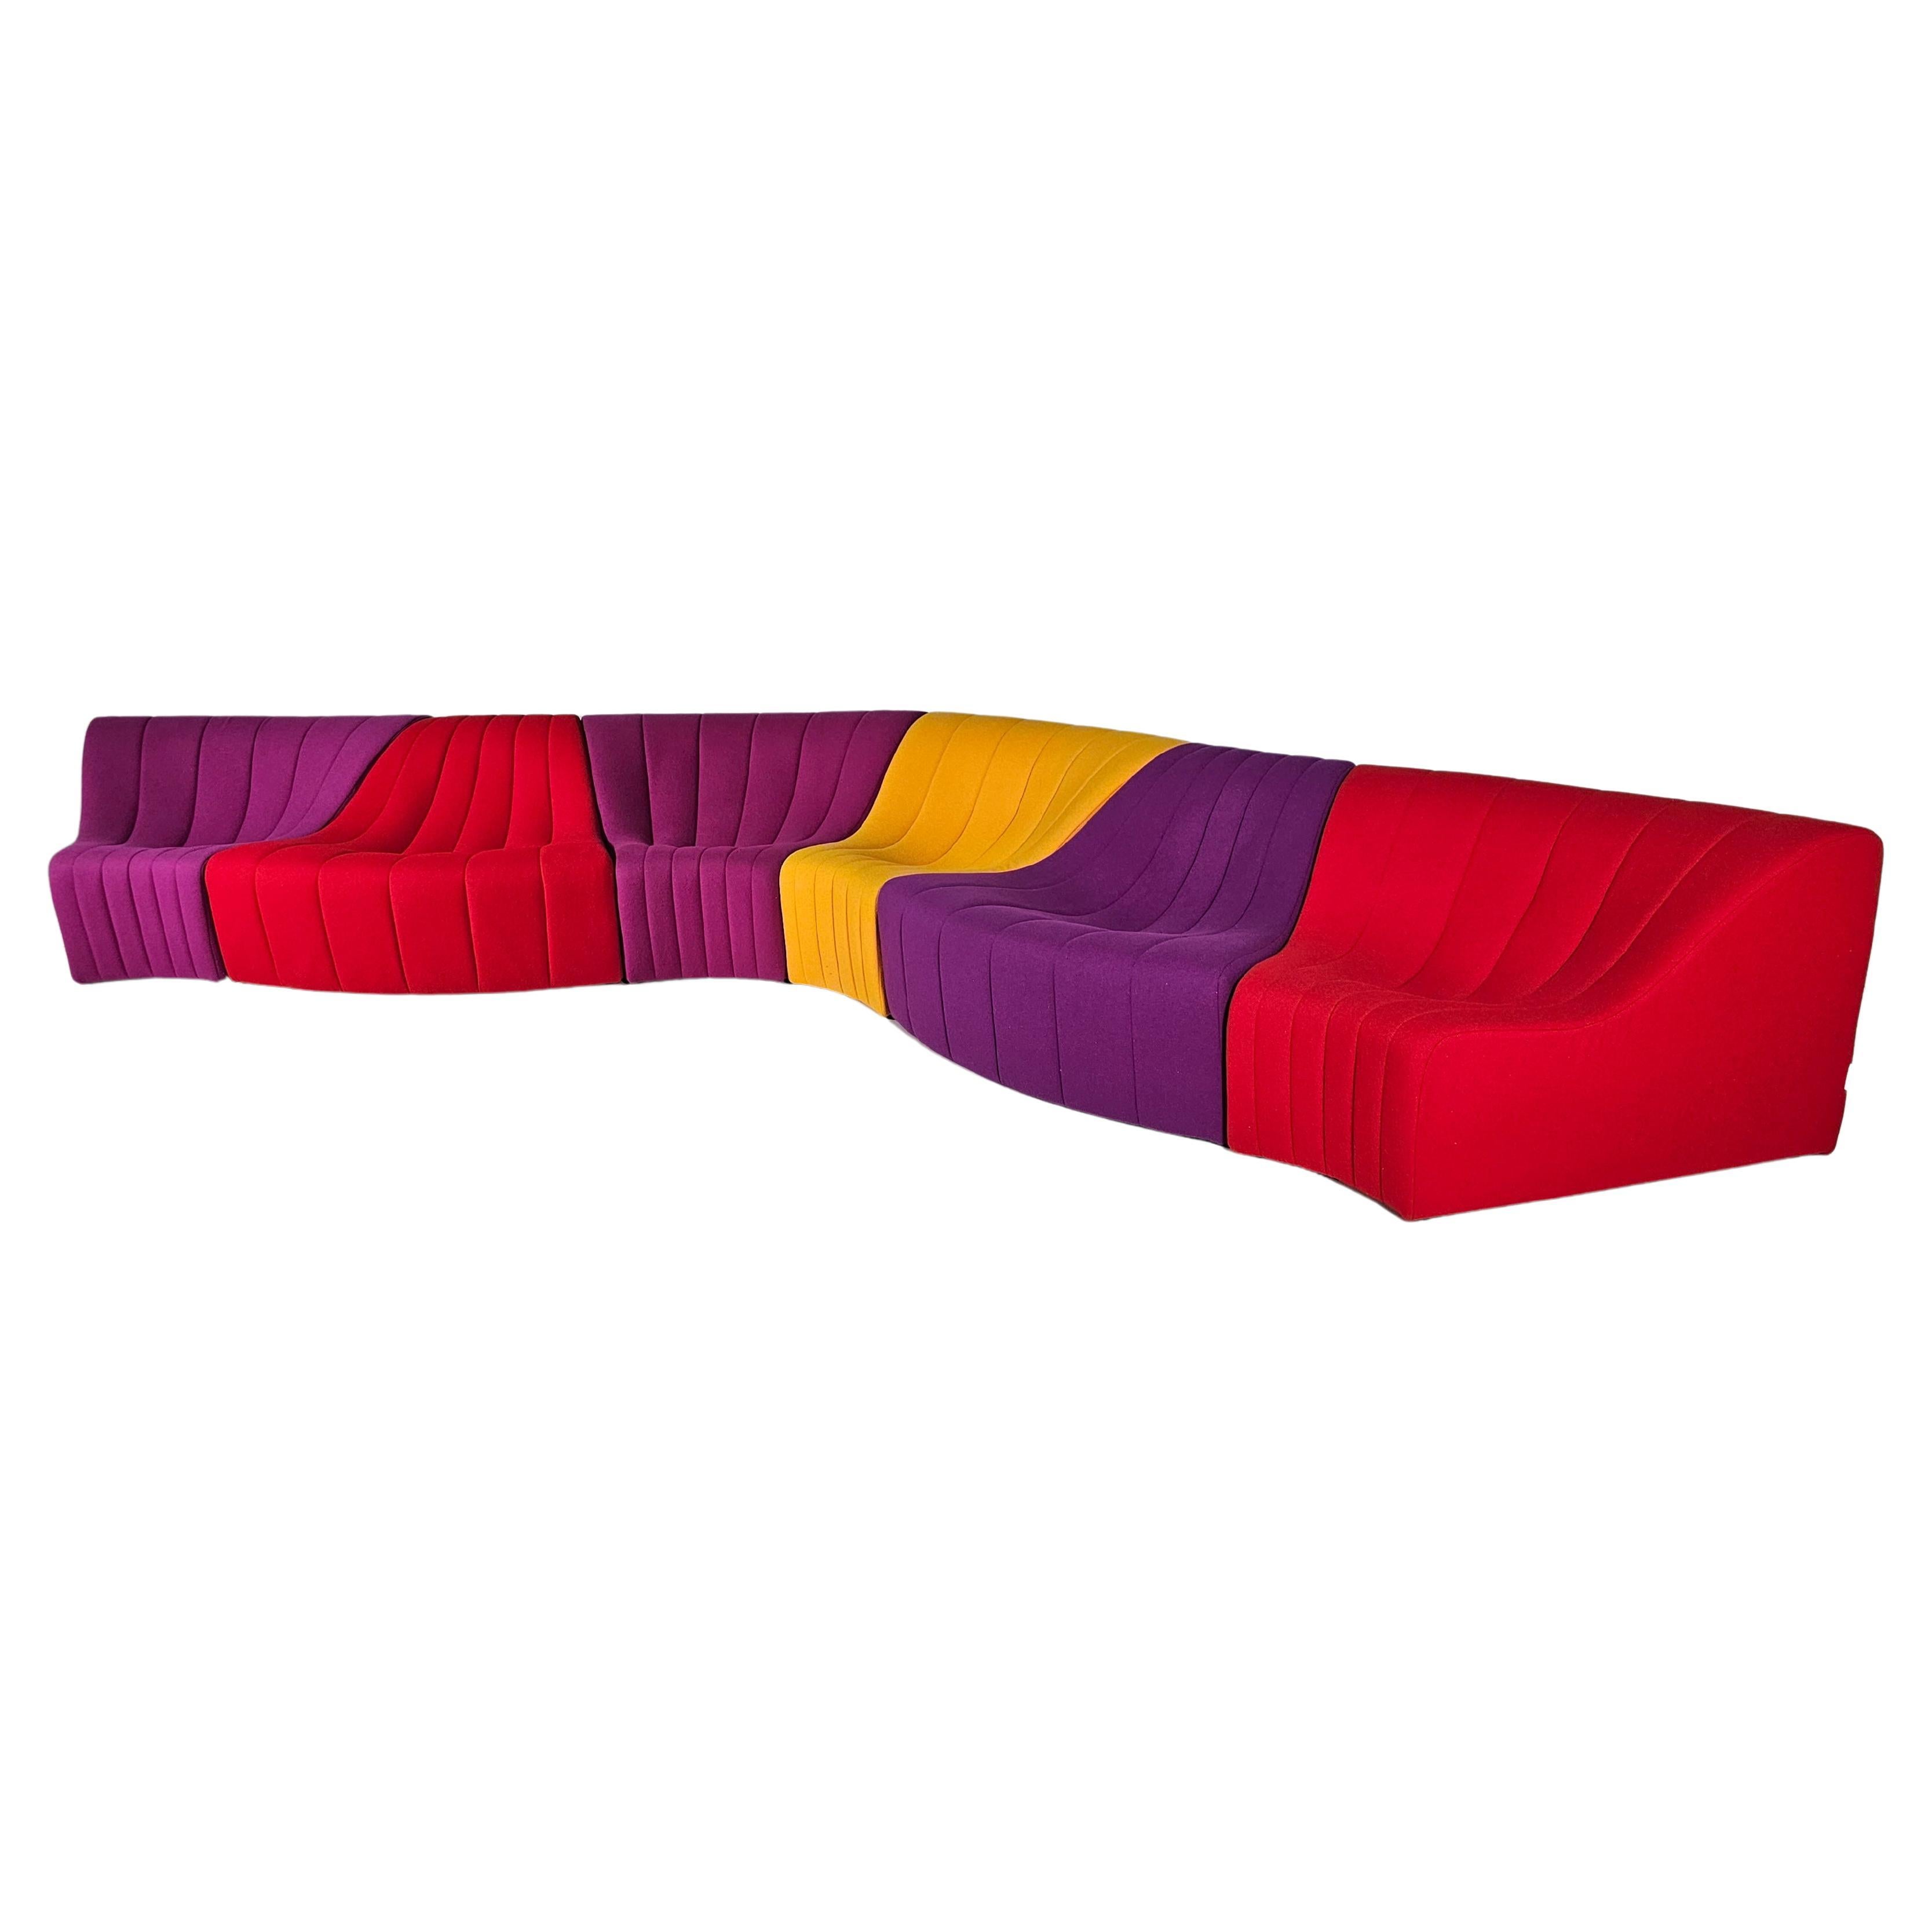 Kwok Hoi Chan for Steiner, sectional sofa, model ´chromatic´, fabric, France, 1970

This Chromatic sofa was designed by Kwok Hoi Chan in 1970 for Steiner. 
This seamless seating system consists of six elements, which allow the creation of different